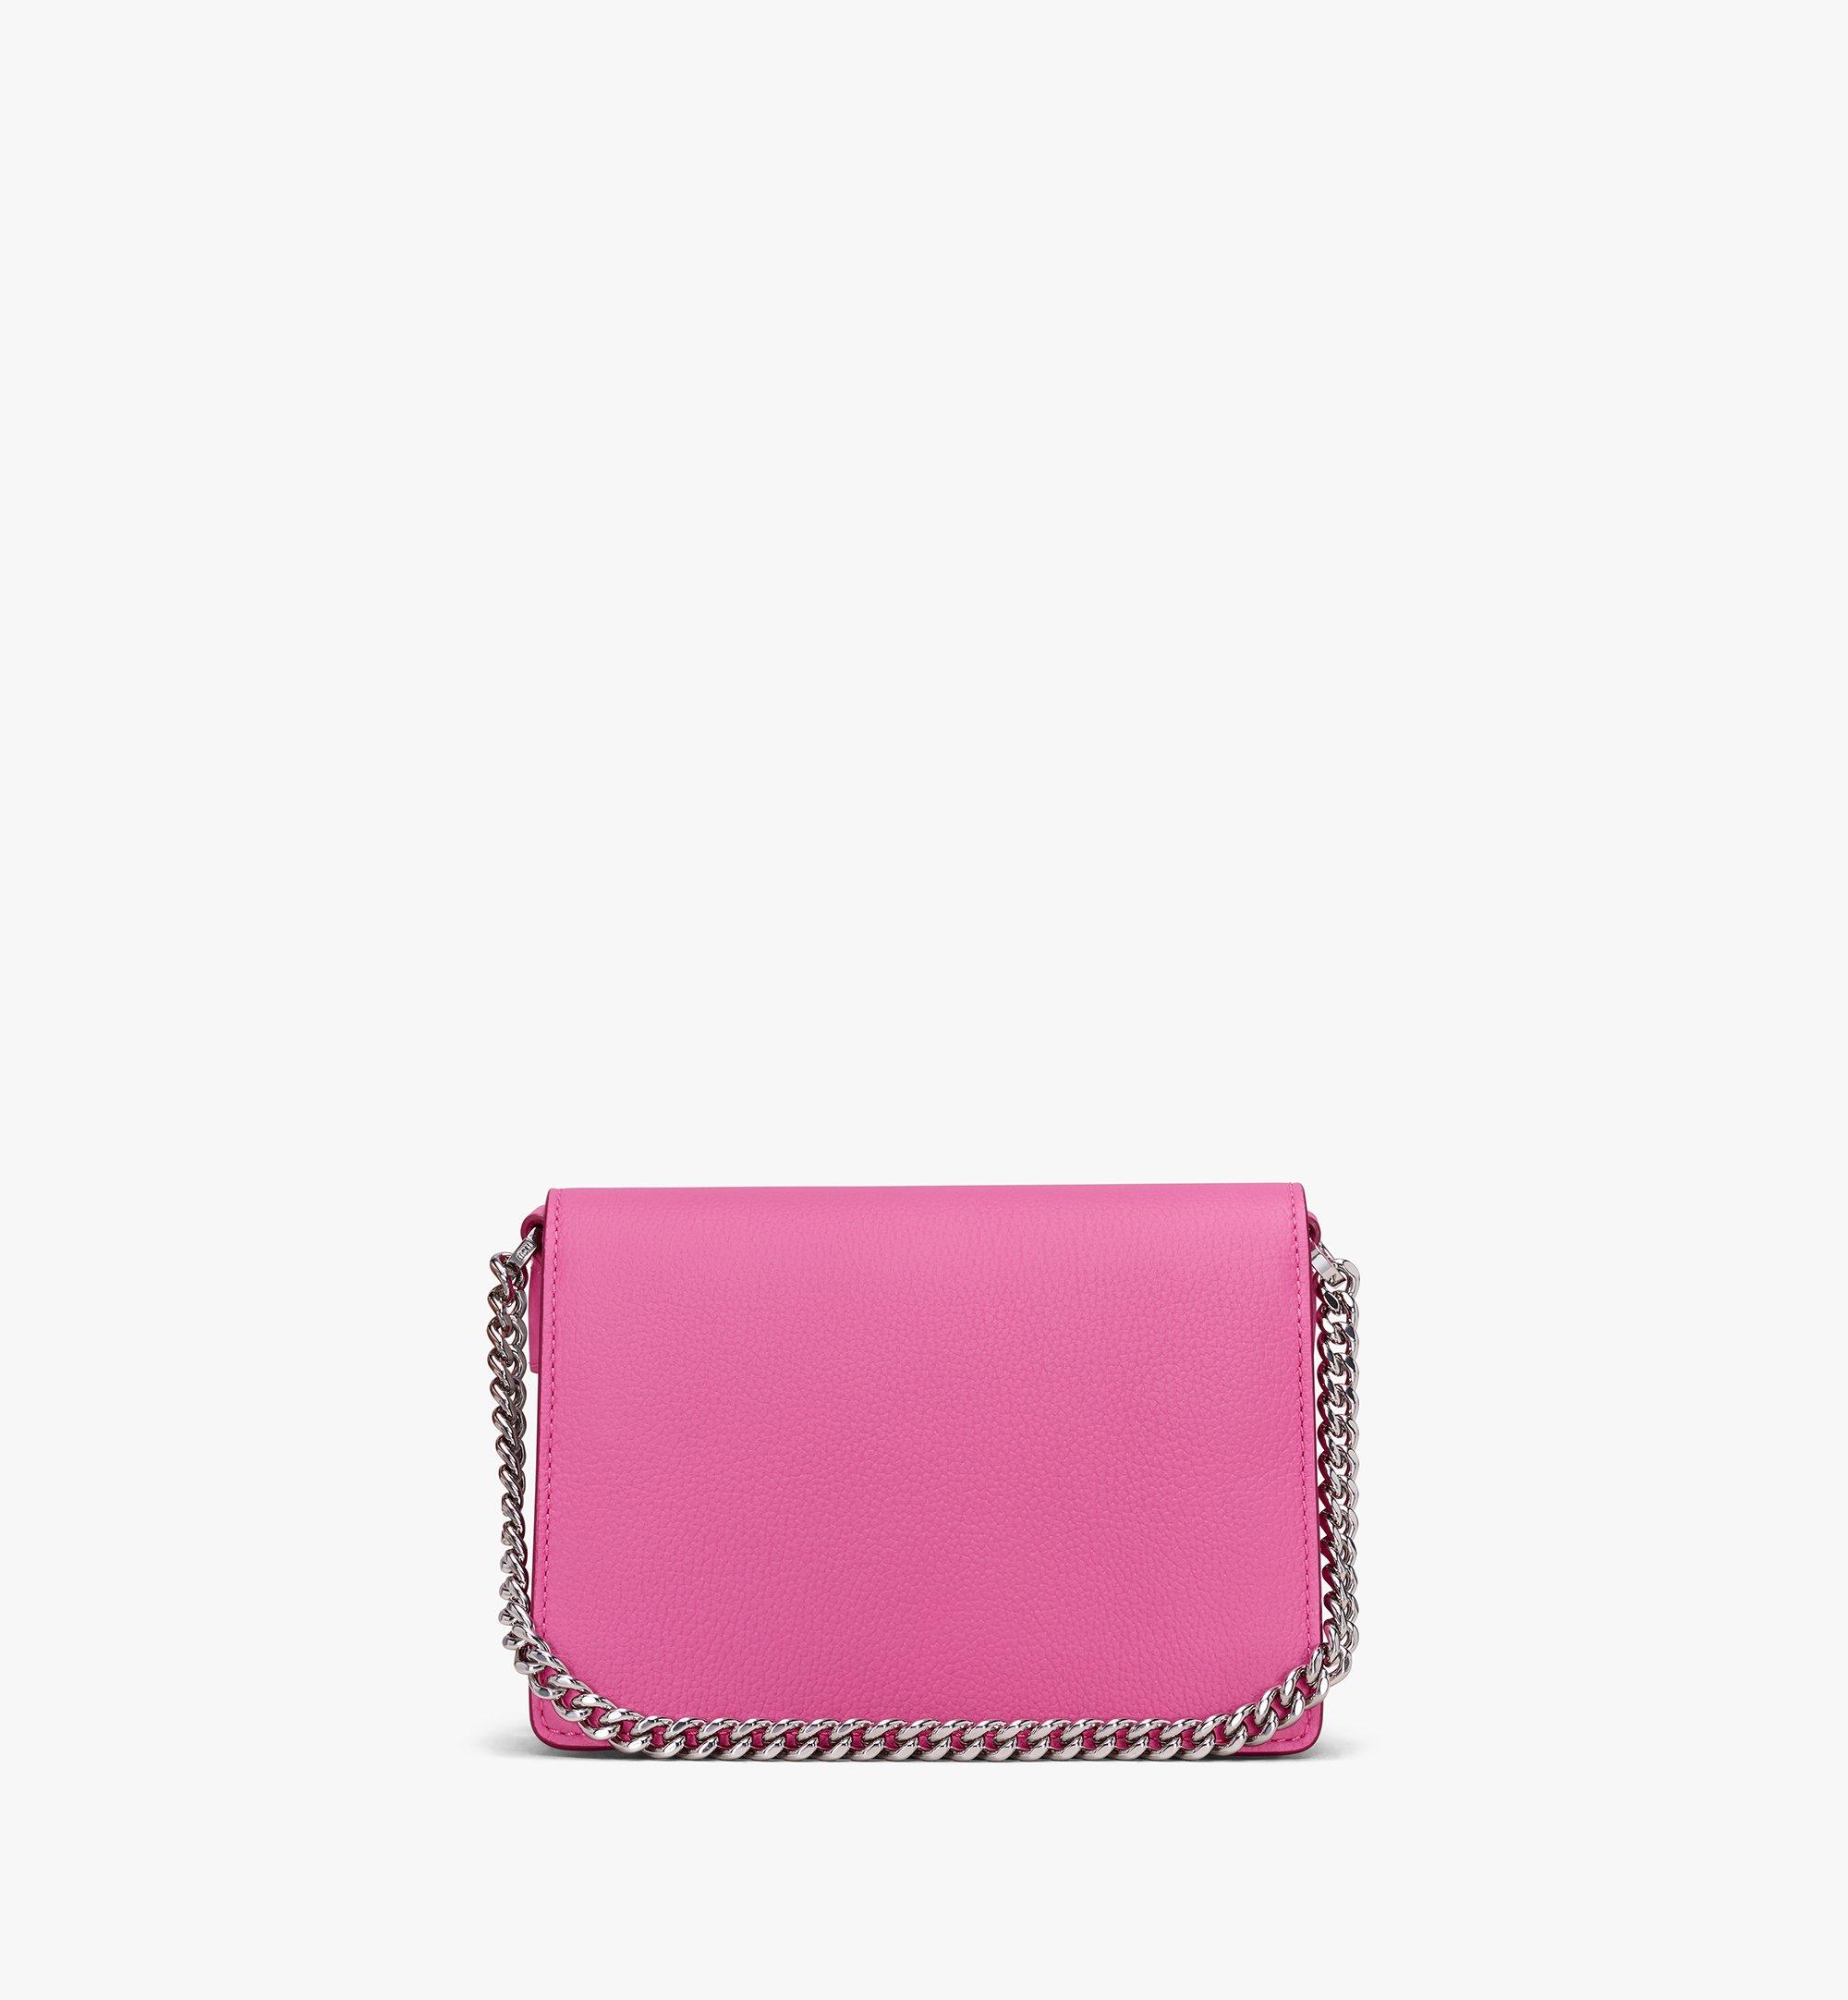 Mcm Patricia Crossbody in Park Avenue Leather - Pink - Shoulder Bags